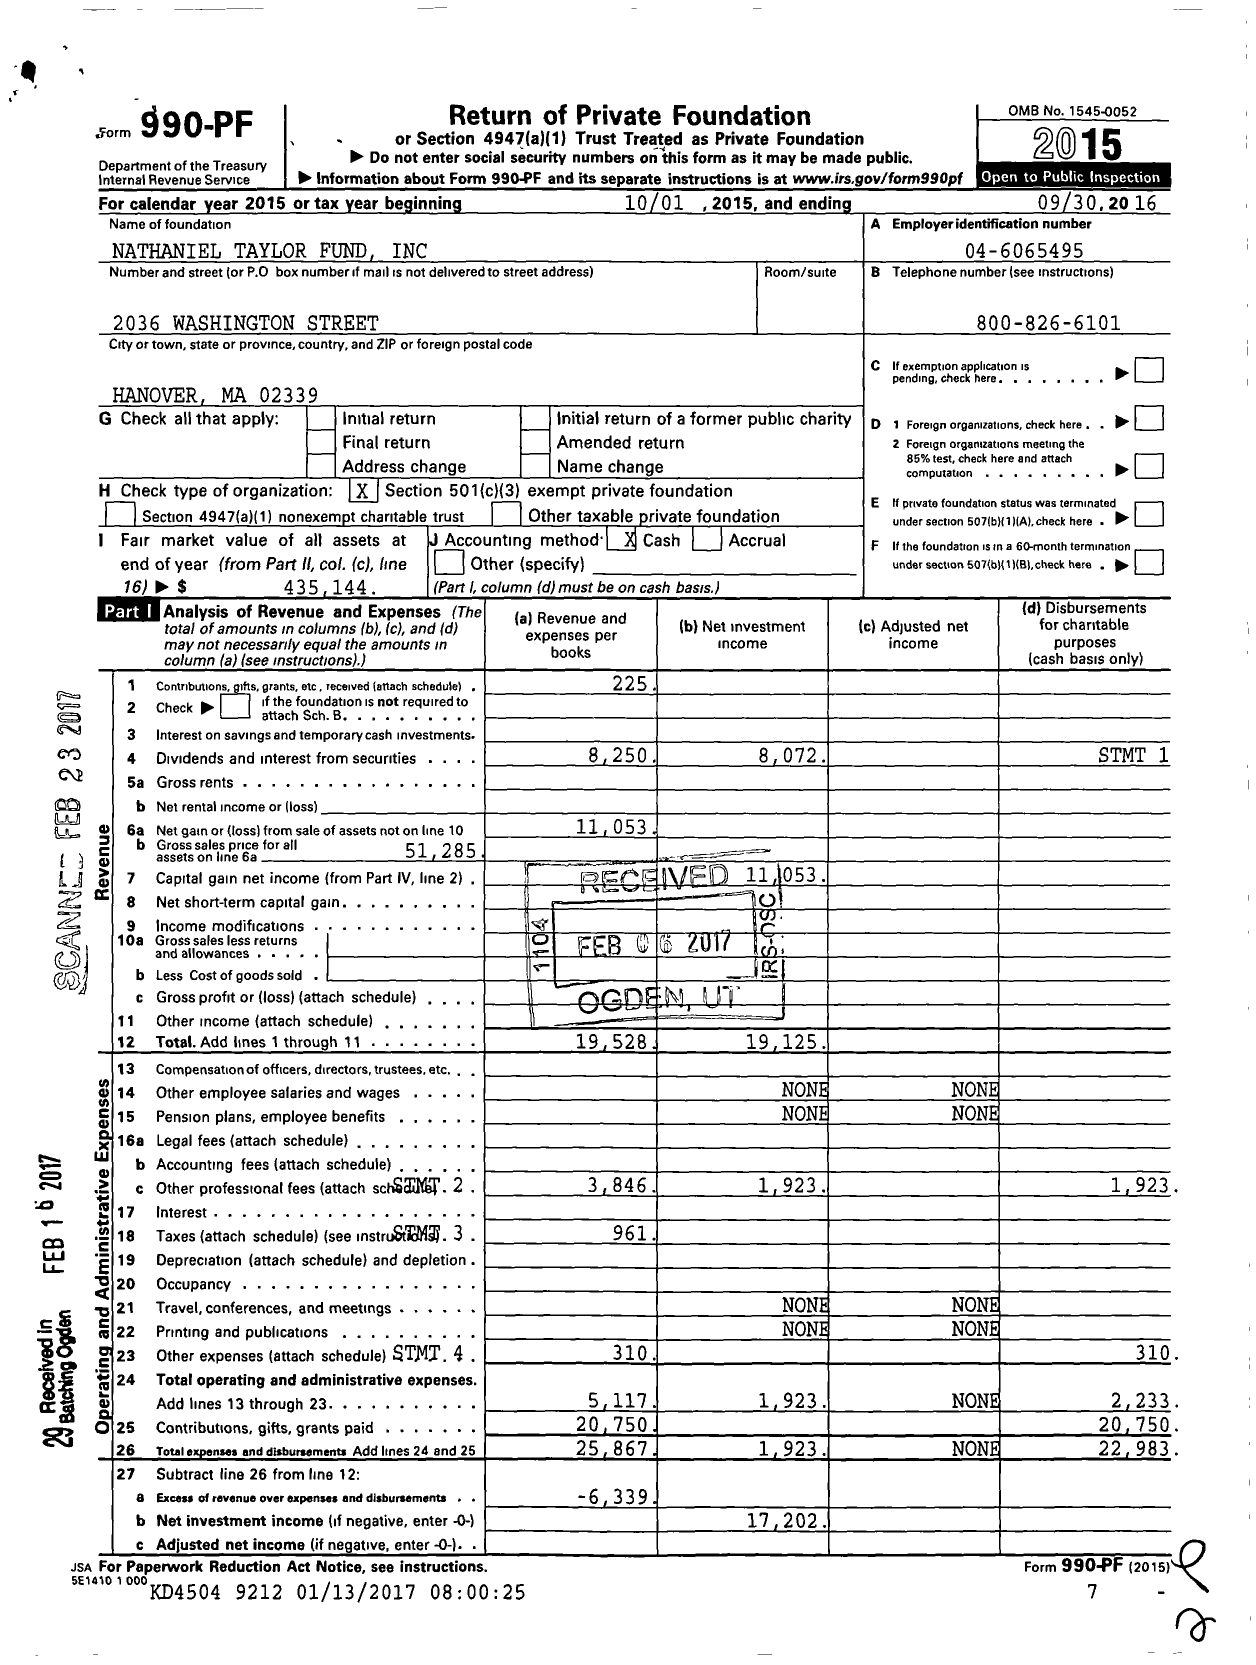 Image of first page of 2015 Form 990PF for Nathaniel Taylor Fund